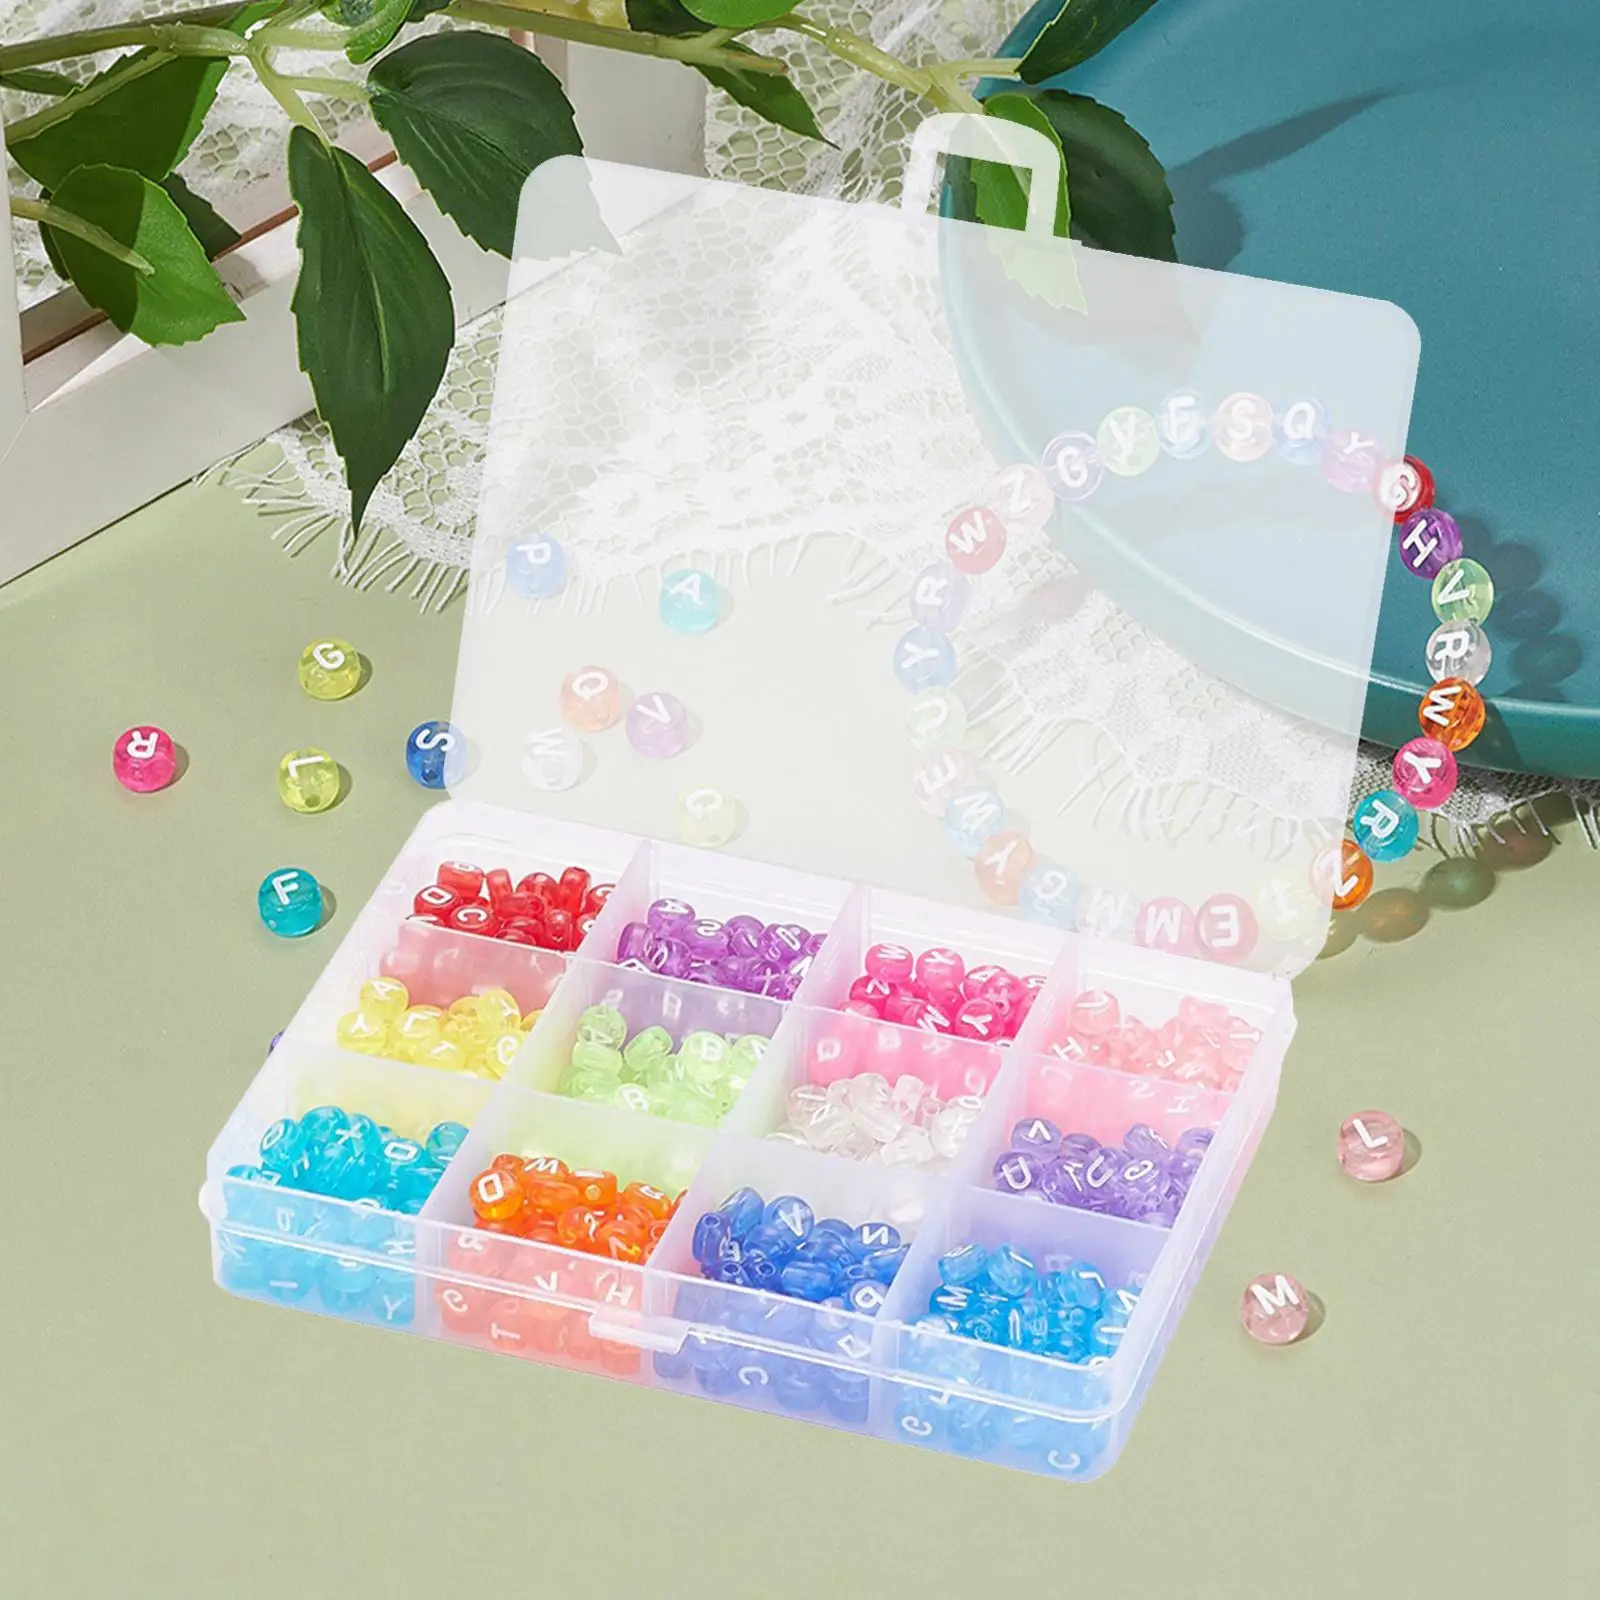 600Pcs Round Acrylic Alphabet Letter Beads DIY Charms Mixed 12Colors A-Z Letter for Crafts Key Chains Earring Necklace Bracelets